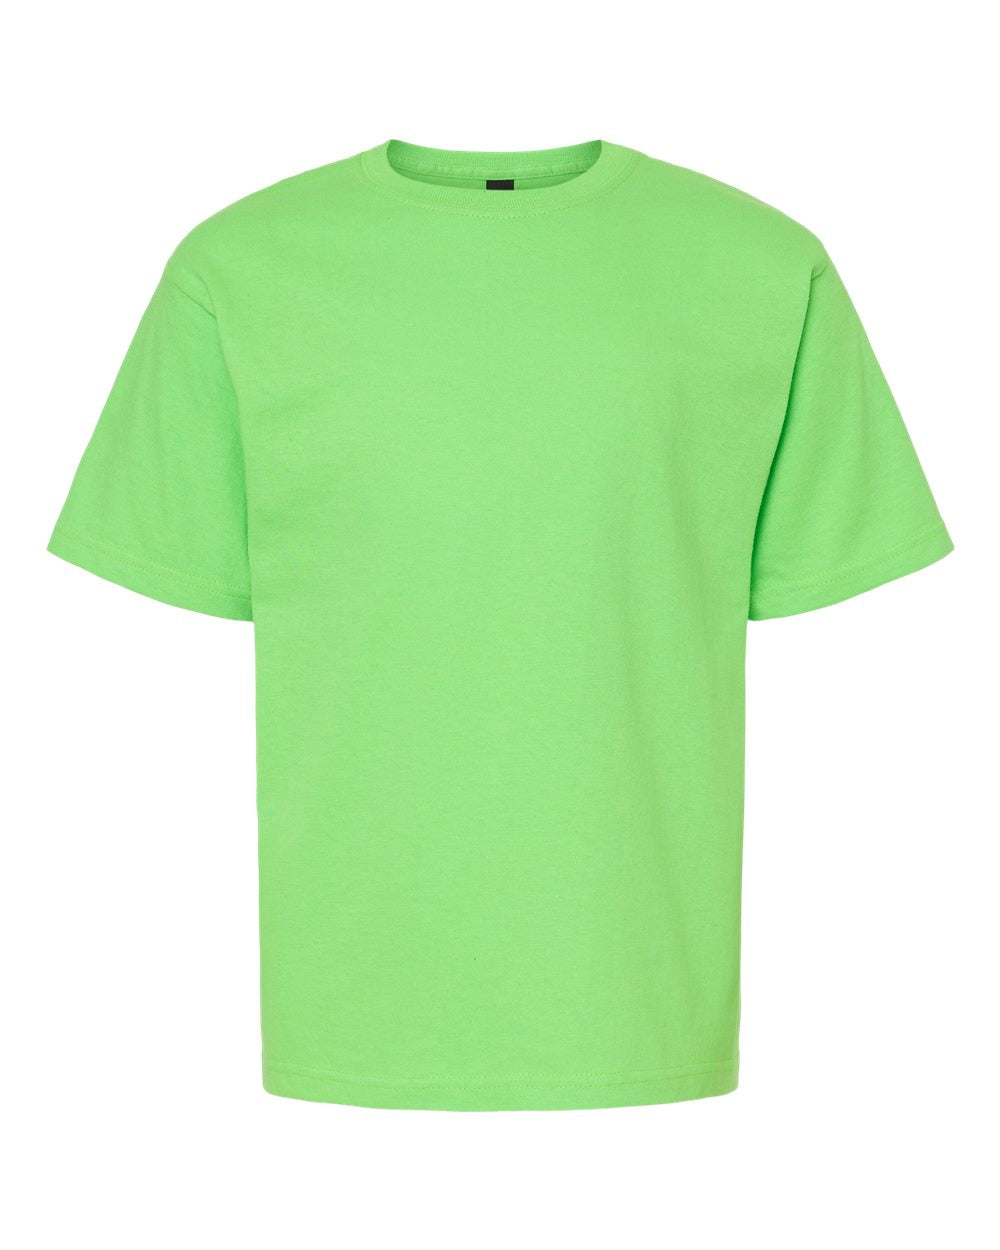 M&O Youth Gold Soft Touch T-Shirt 4850 #color_Vivid Lime